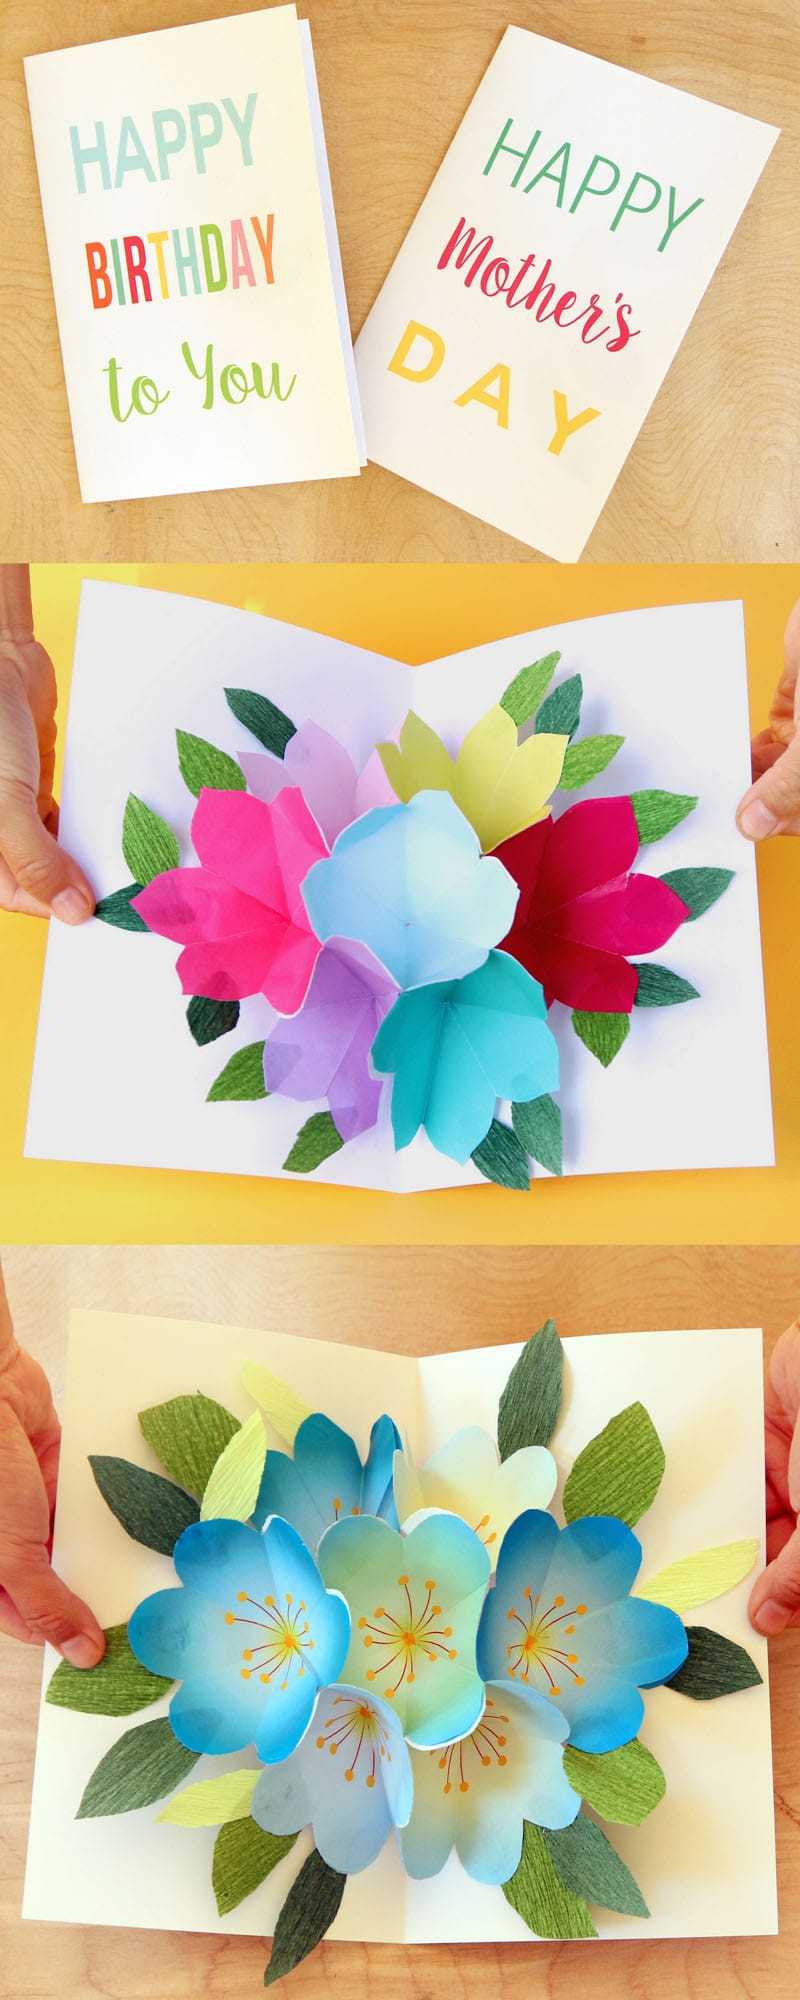 Free Printable Happy Birthday Card With Pop Up Bouquet – A In Free Printable Pop Up Card Templates